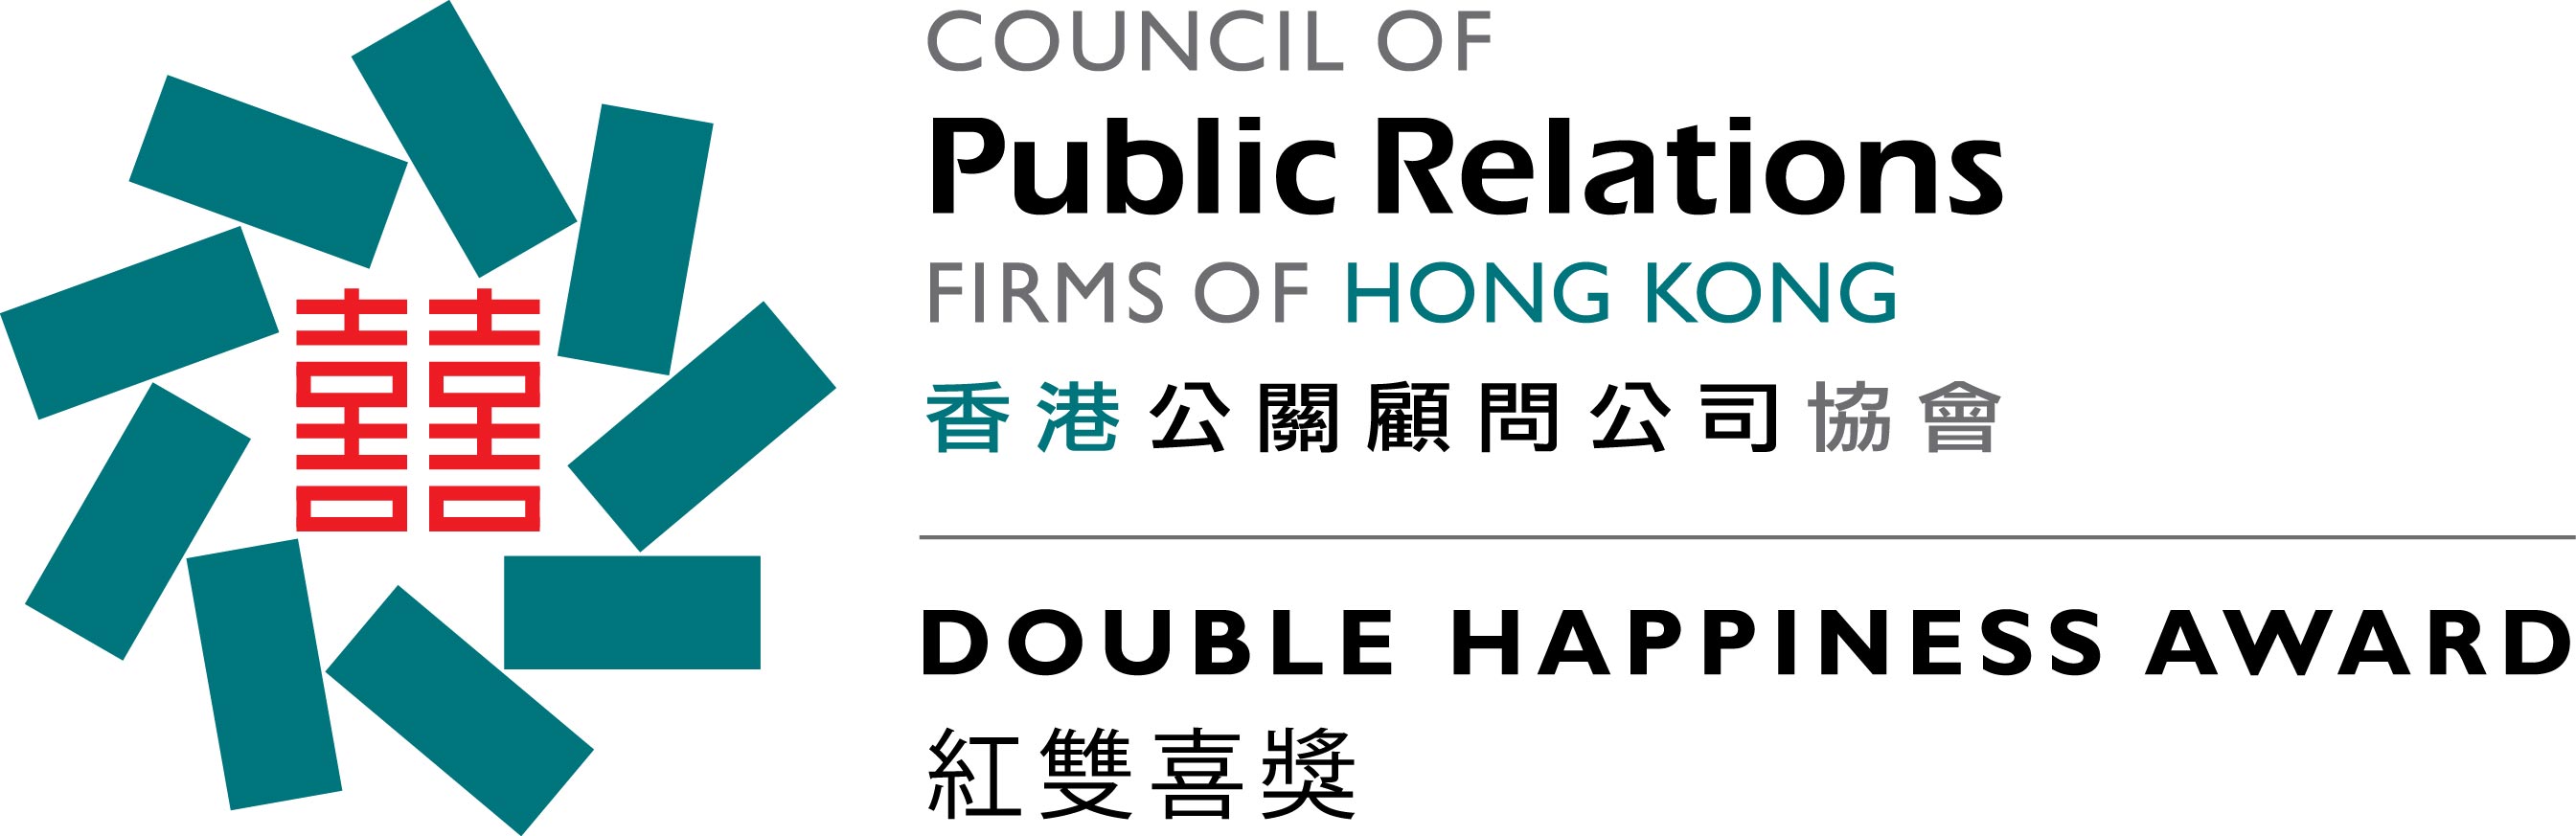 Council of Public Relations Firms of Hong Kong launches 'Double Happiness' Awards